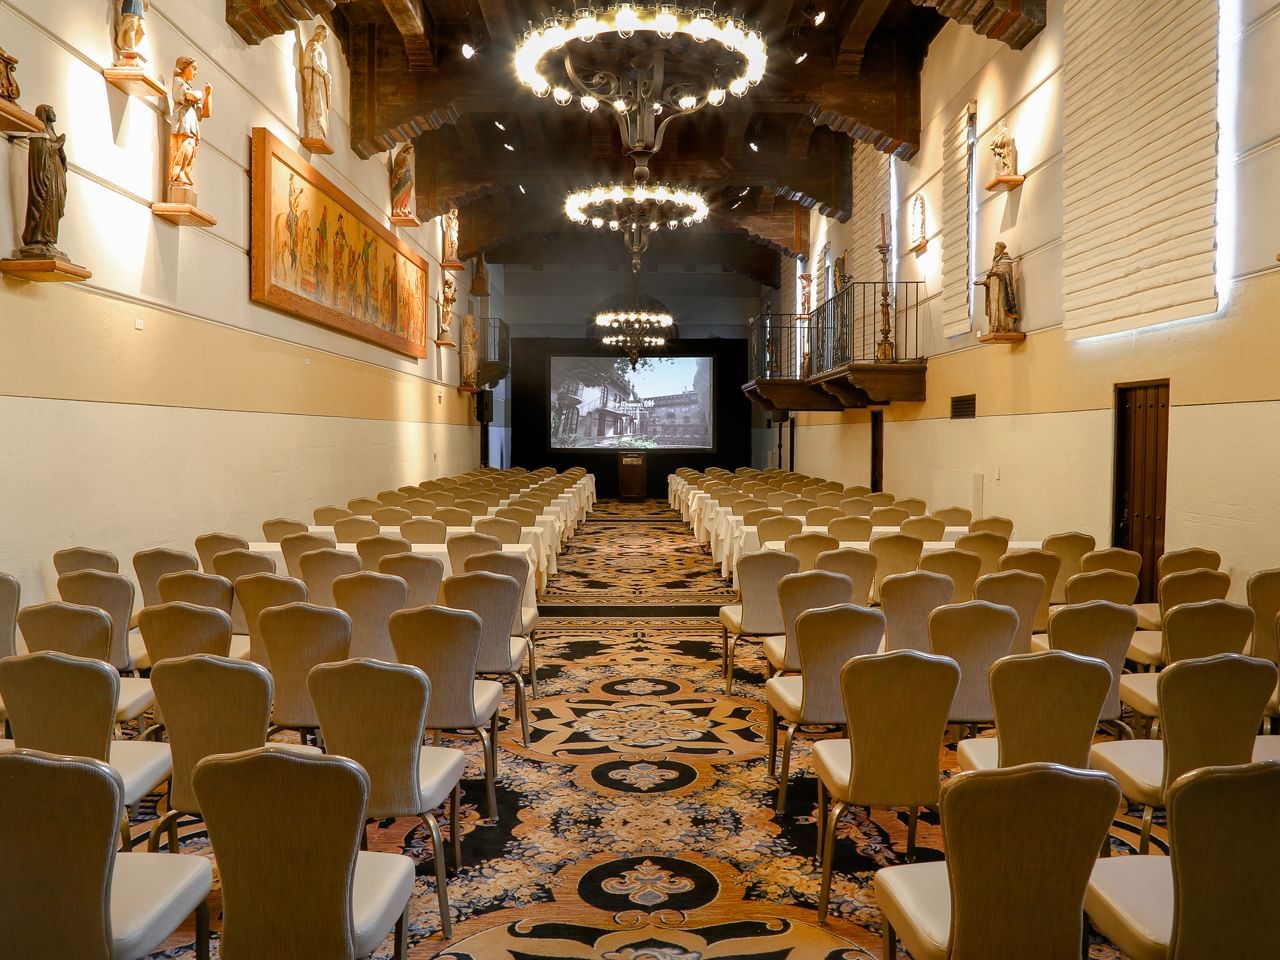 conference with large projection screen and chairs